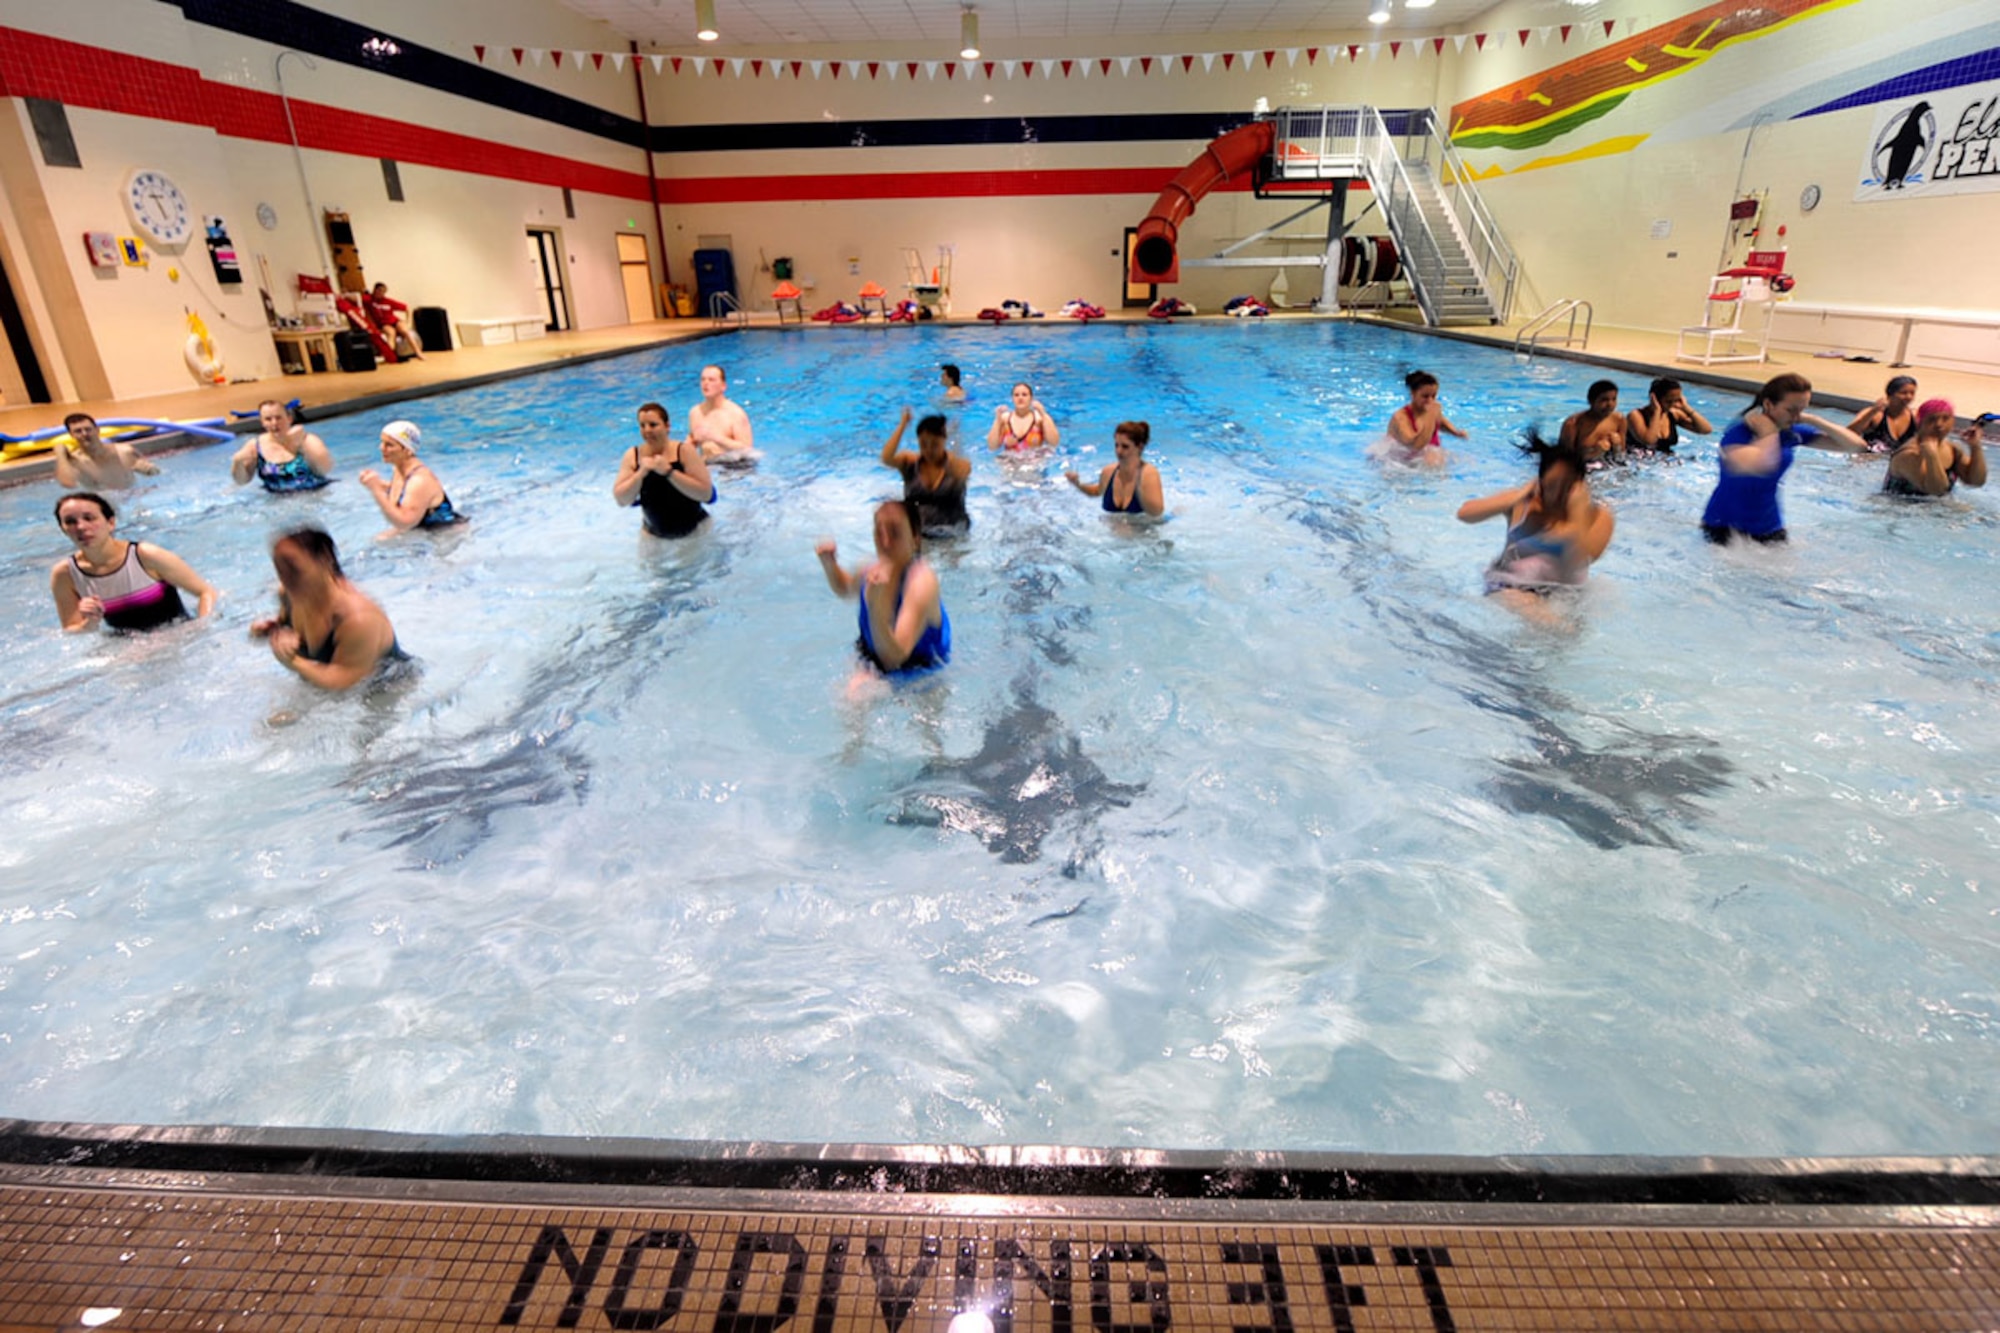 Water aerobics students demonstrate a knee cross at the Elmendorf Fitness Center on Joint Base Elmendorf-Richardson Monday. Water aerobic class offers a low-impact,
high-movement workout for cardiovascular, upper and lower body strength and resistance training. (U.S. Air Force photo/Staff Sgt. Sheila deVera)